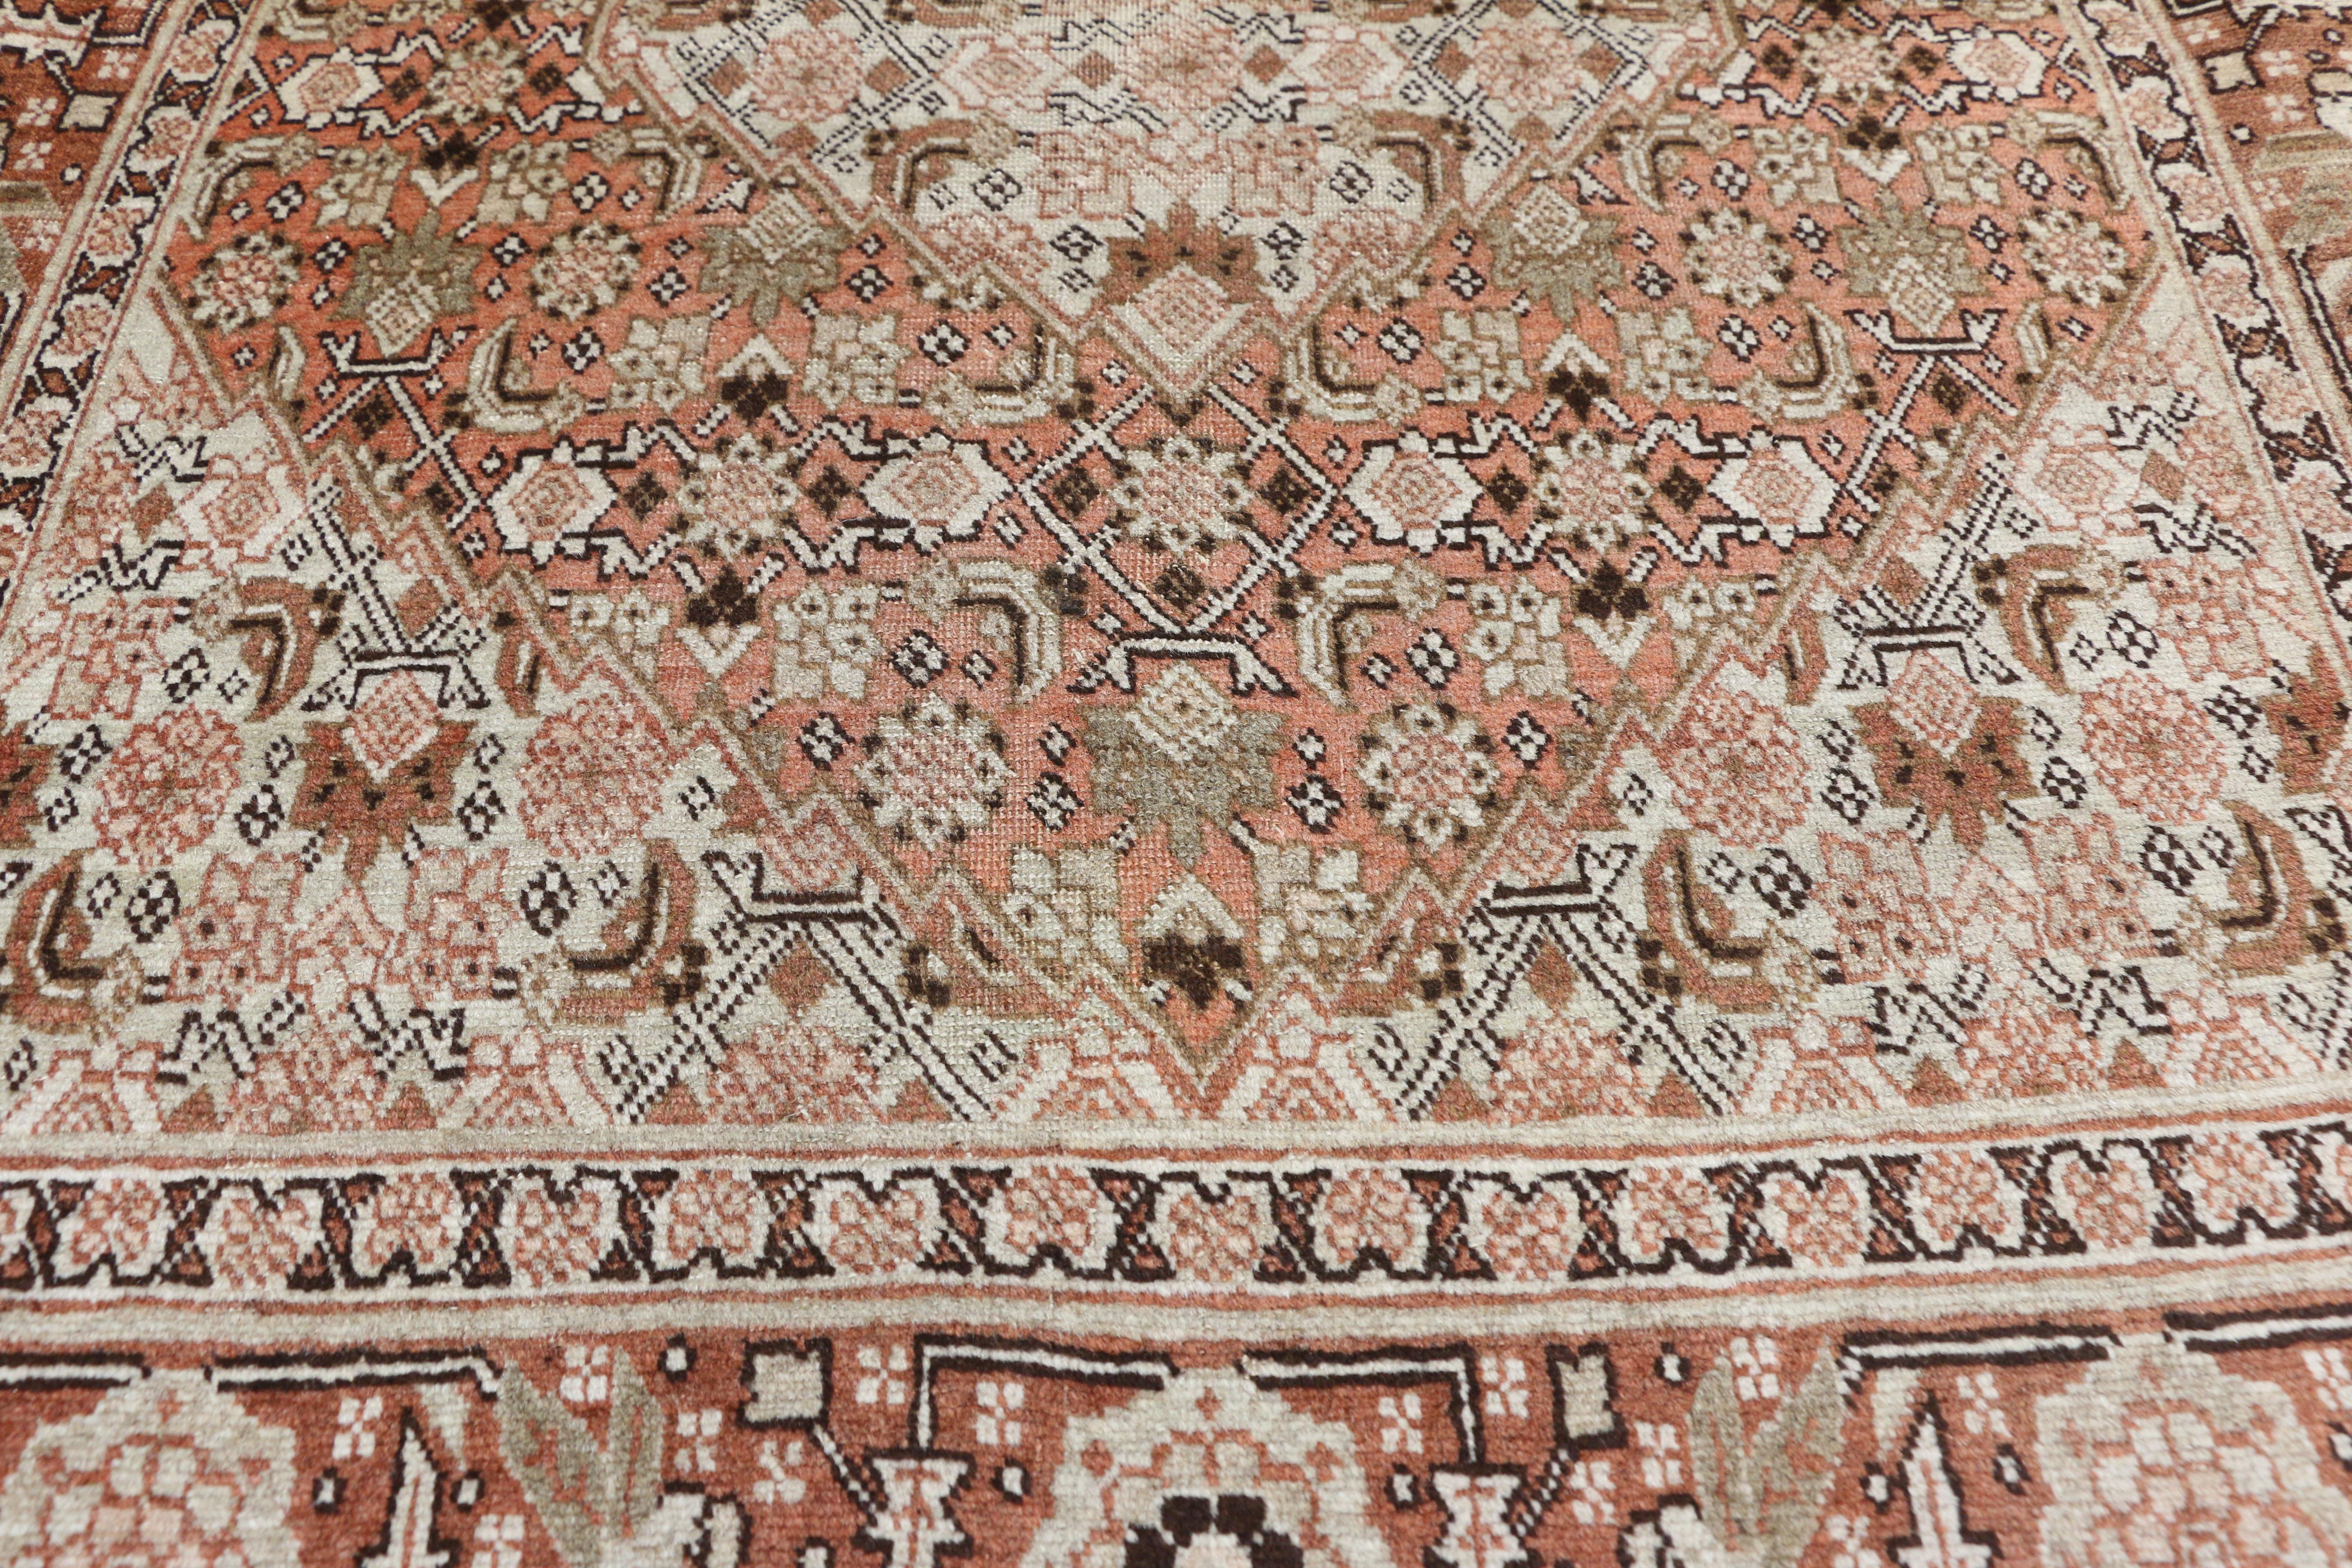 Antique Persian Tabriz Accent Rug, Foyer or Entry Rug with Arts & Crafts Style In Good Condition For Sale In Dallas, TX